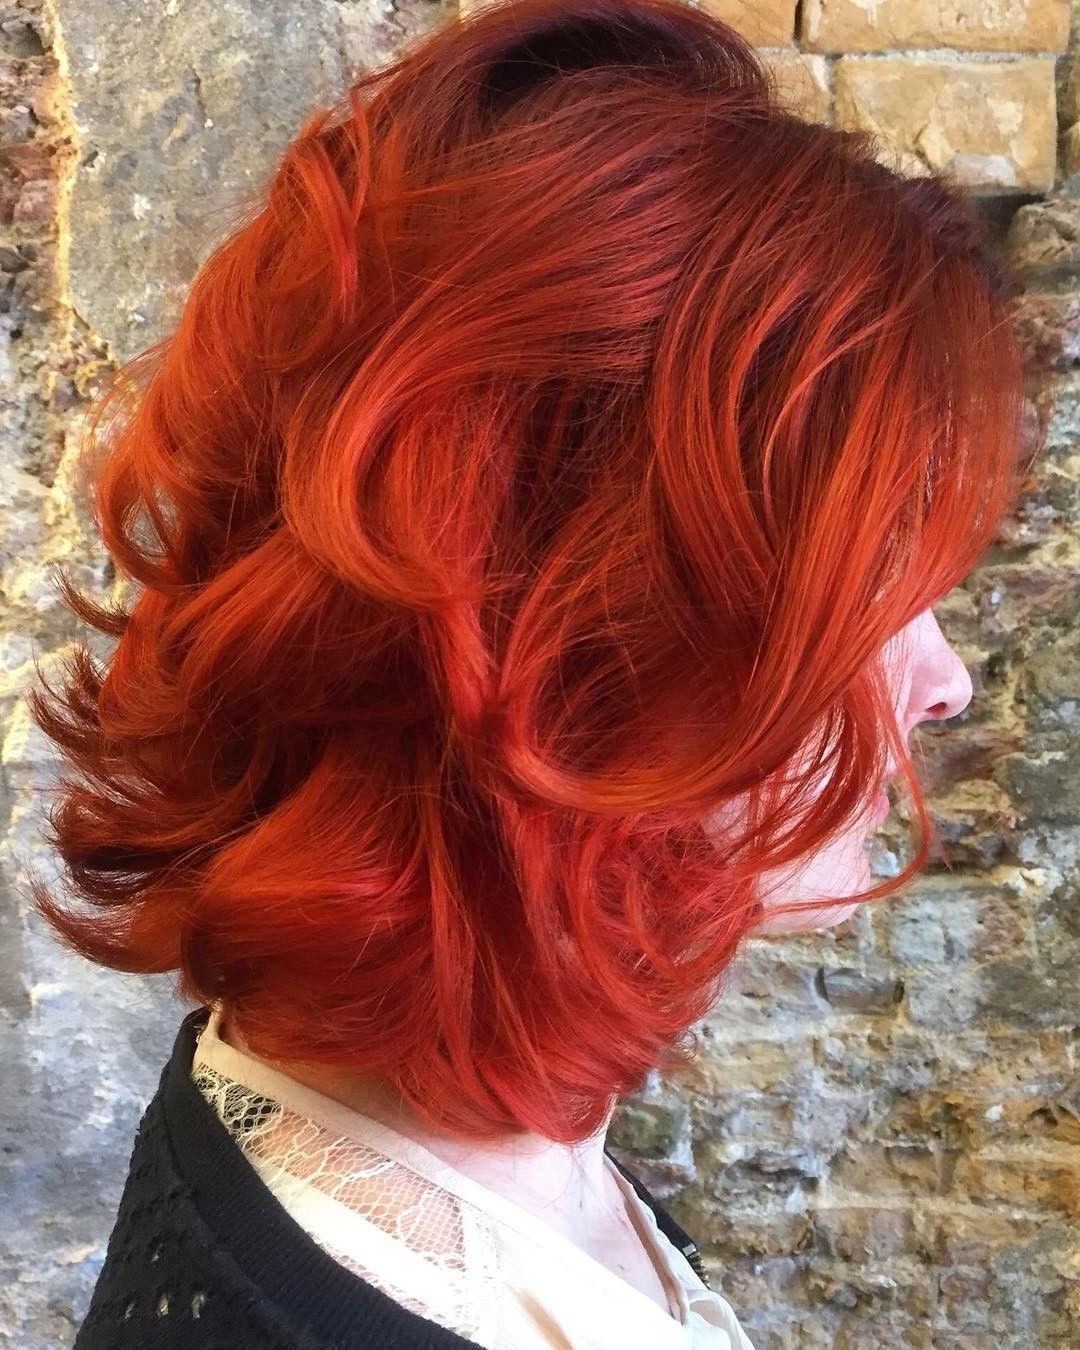 Directions Tangerine | Hair In 2018 | Pinterest | Hair, Hair Color Throughout Burgundy And Tangerine Piecey Bob Hairstyles (View 5 of 20)